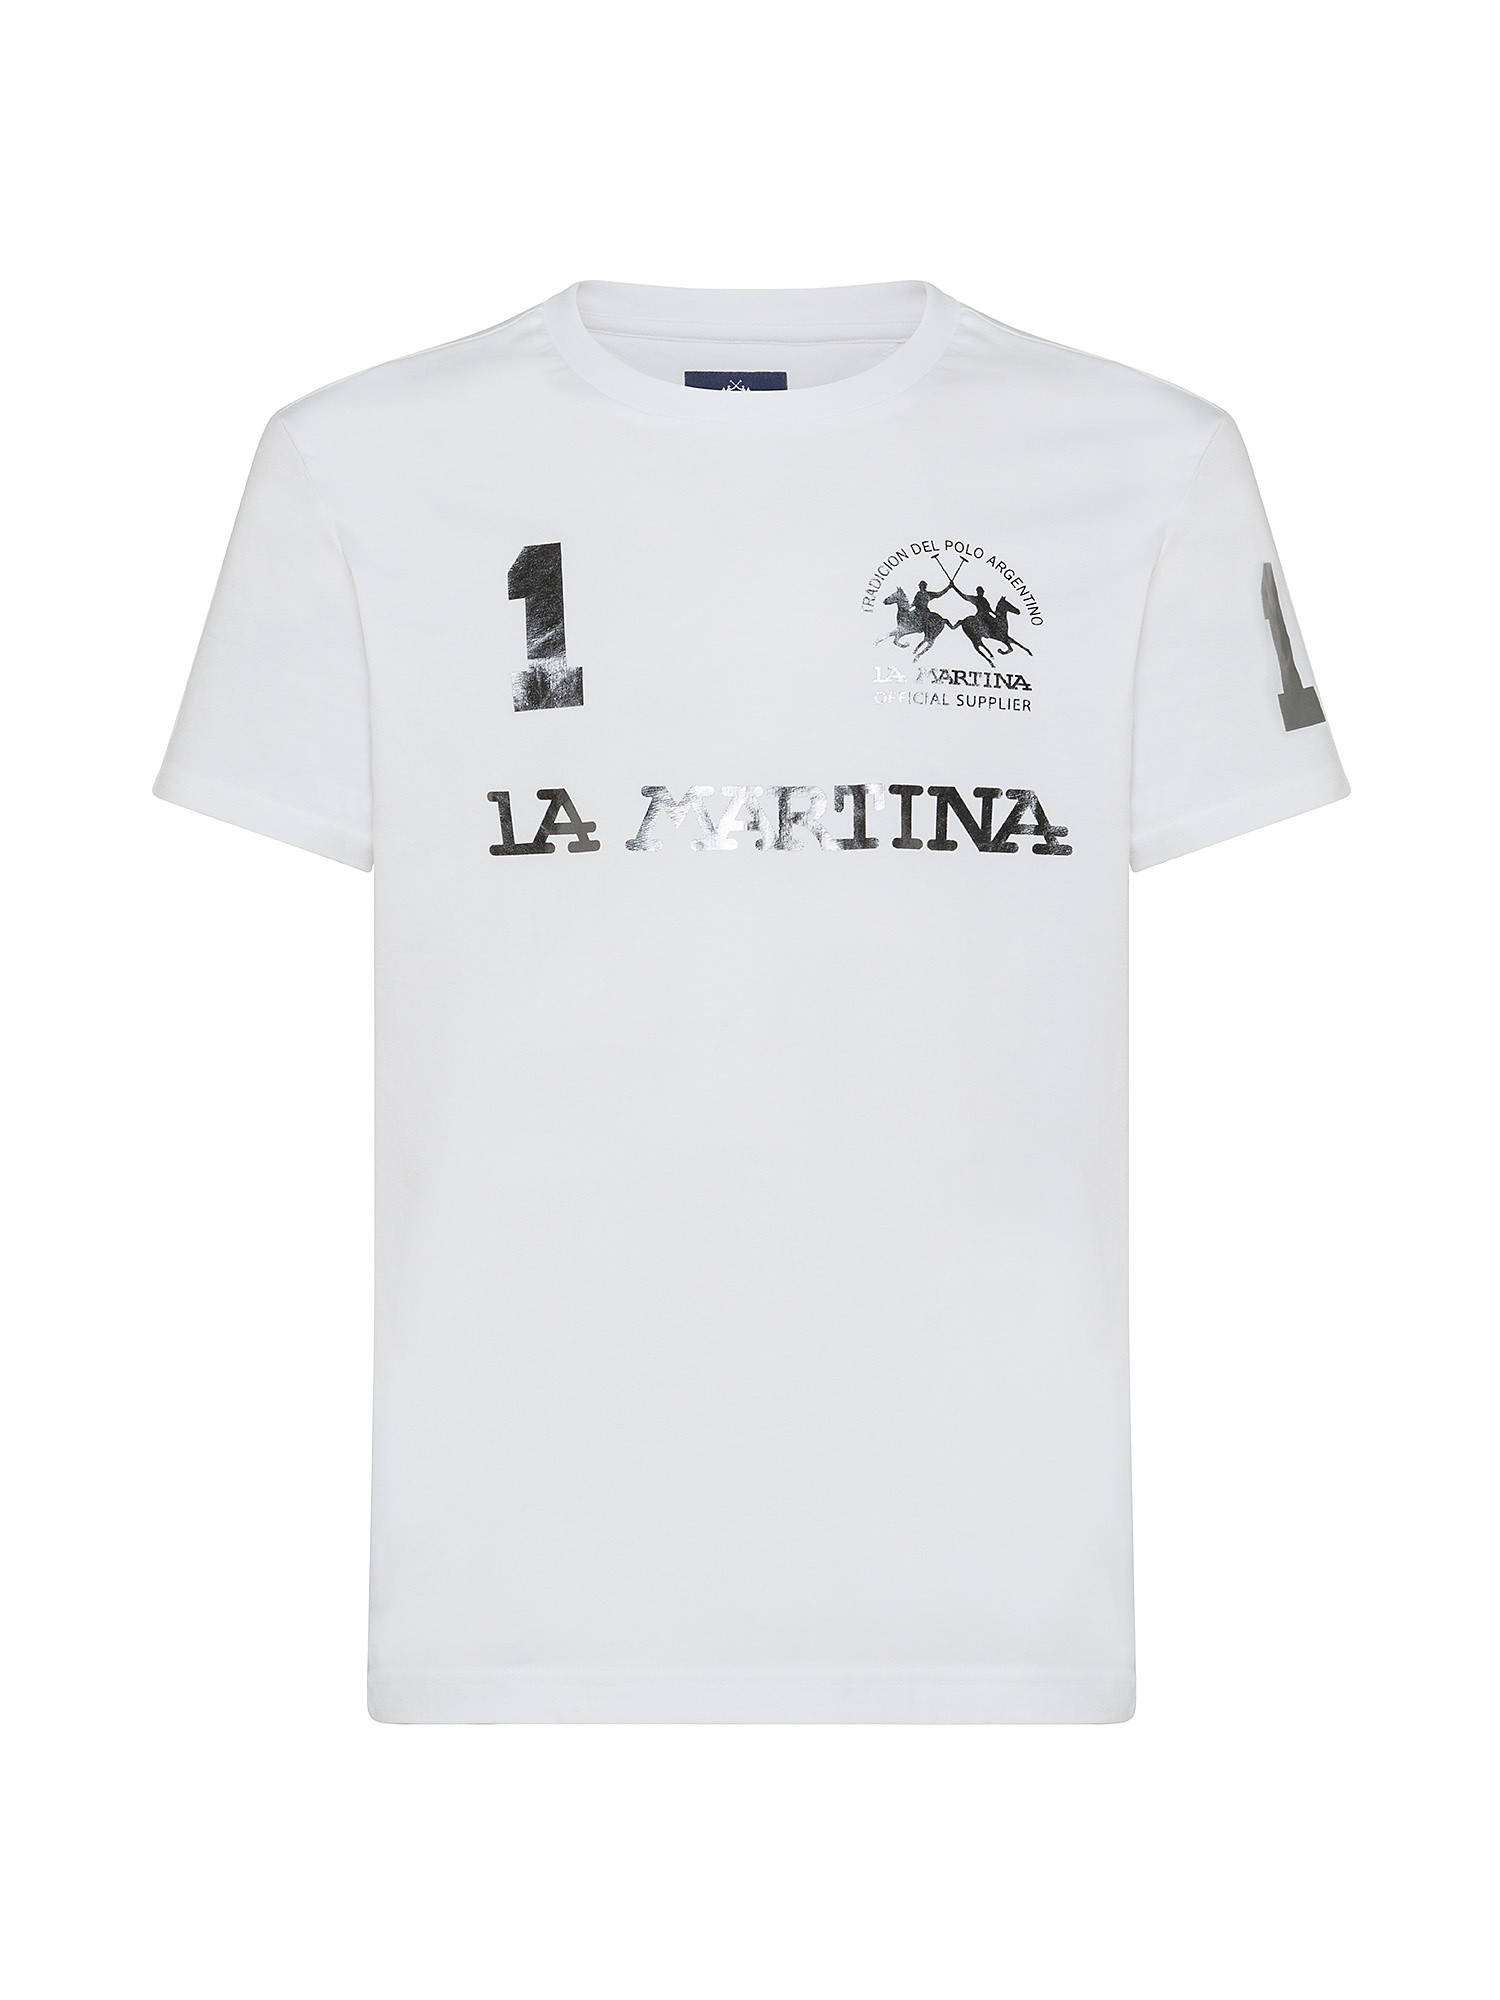 La Martina - Short-sleeved T-shirt in jersey cotton, White, large image number 0